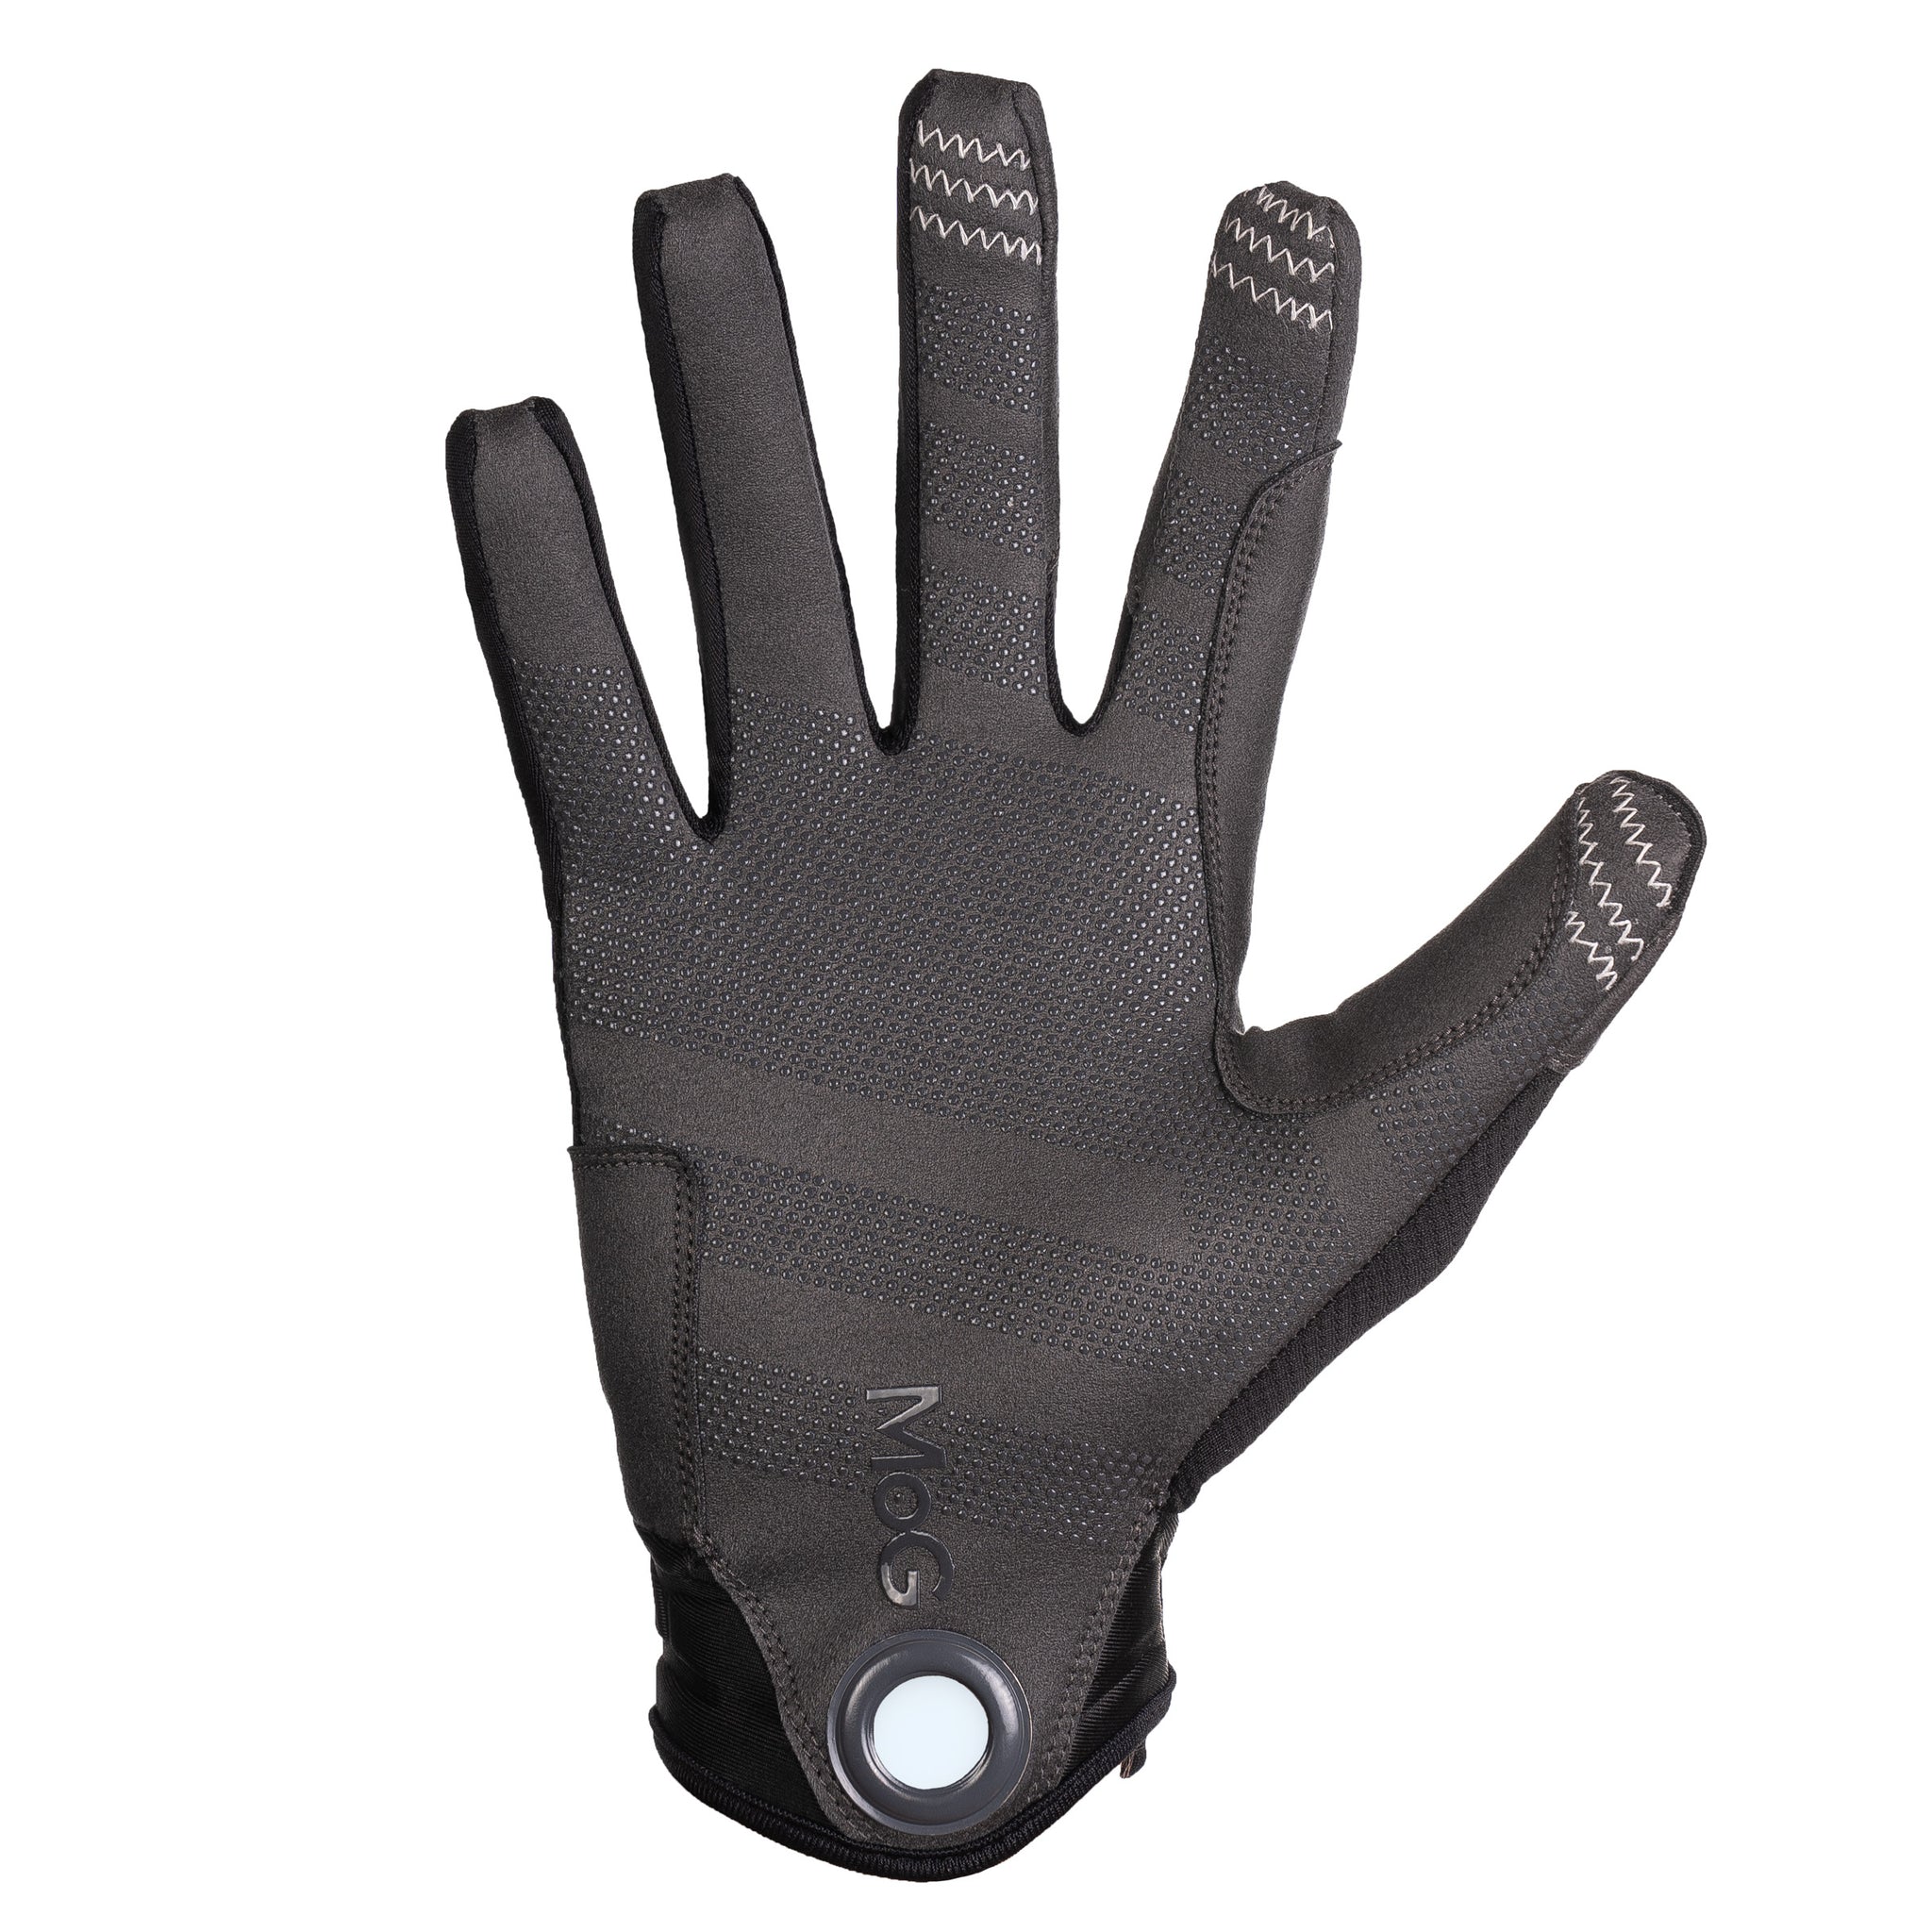 MoG Tactical Glove Collection